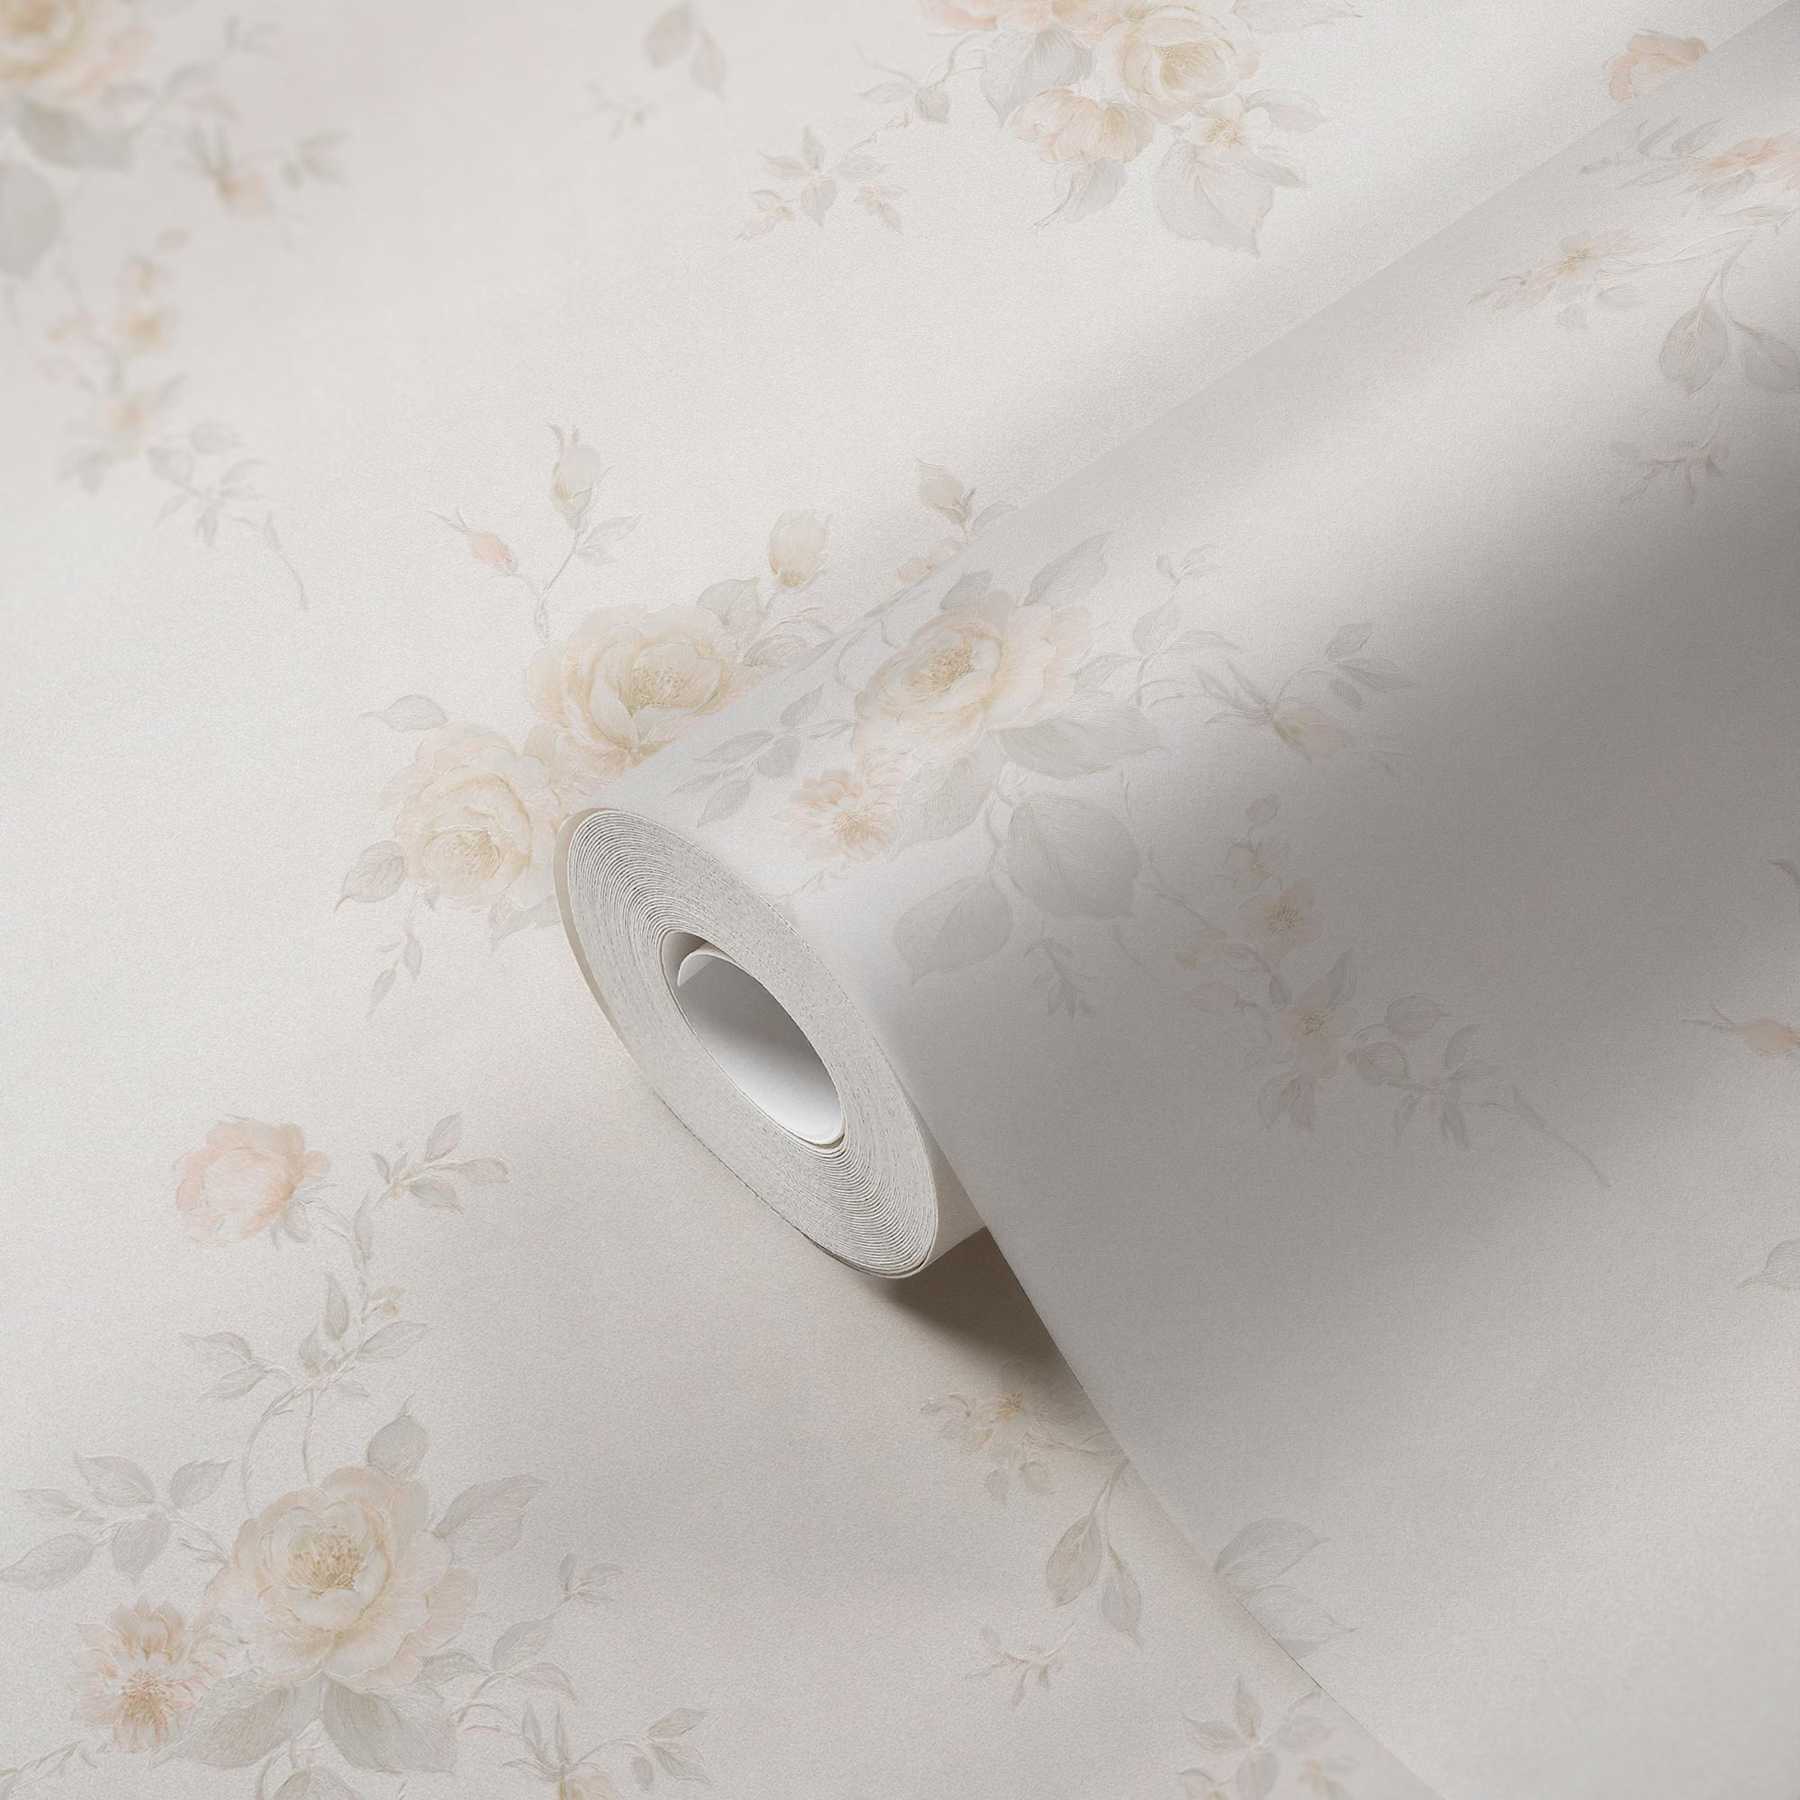             Roses wallpaper floral pattern in country style - cream
        